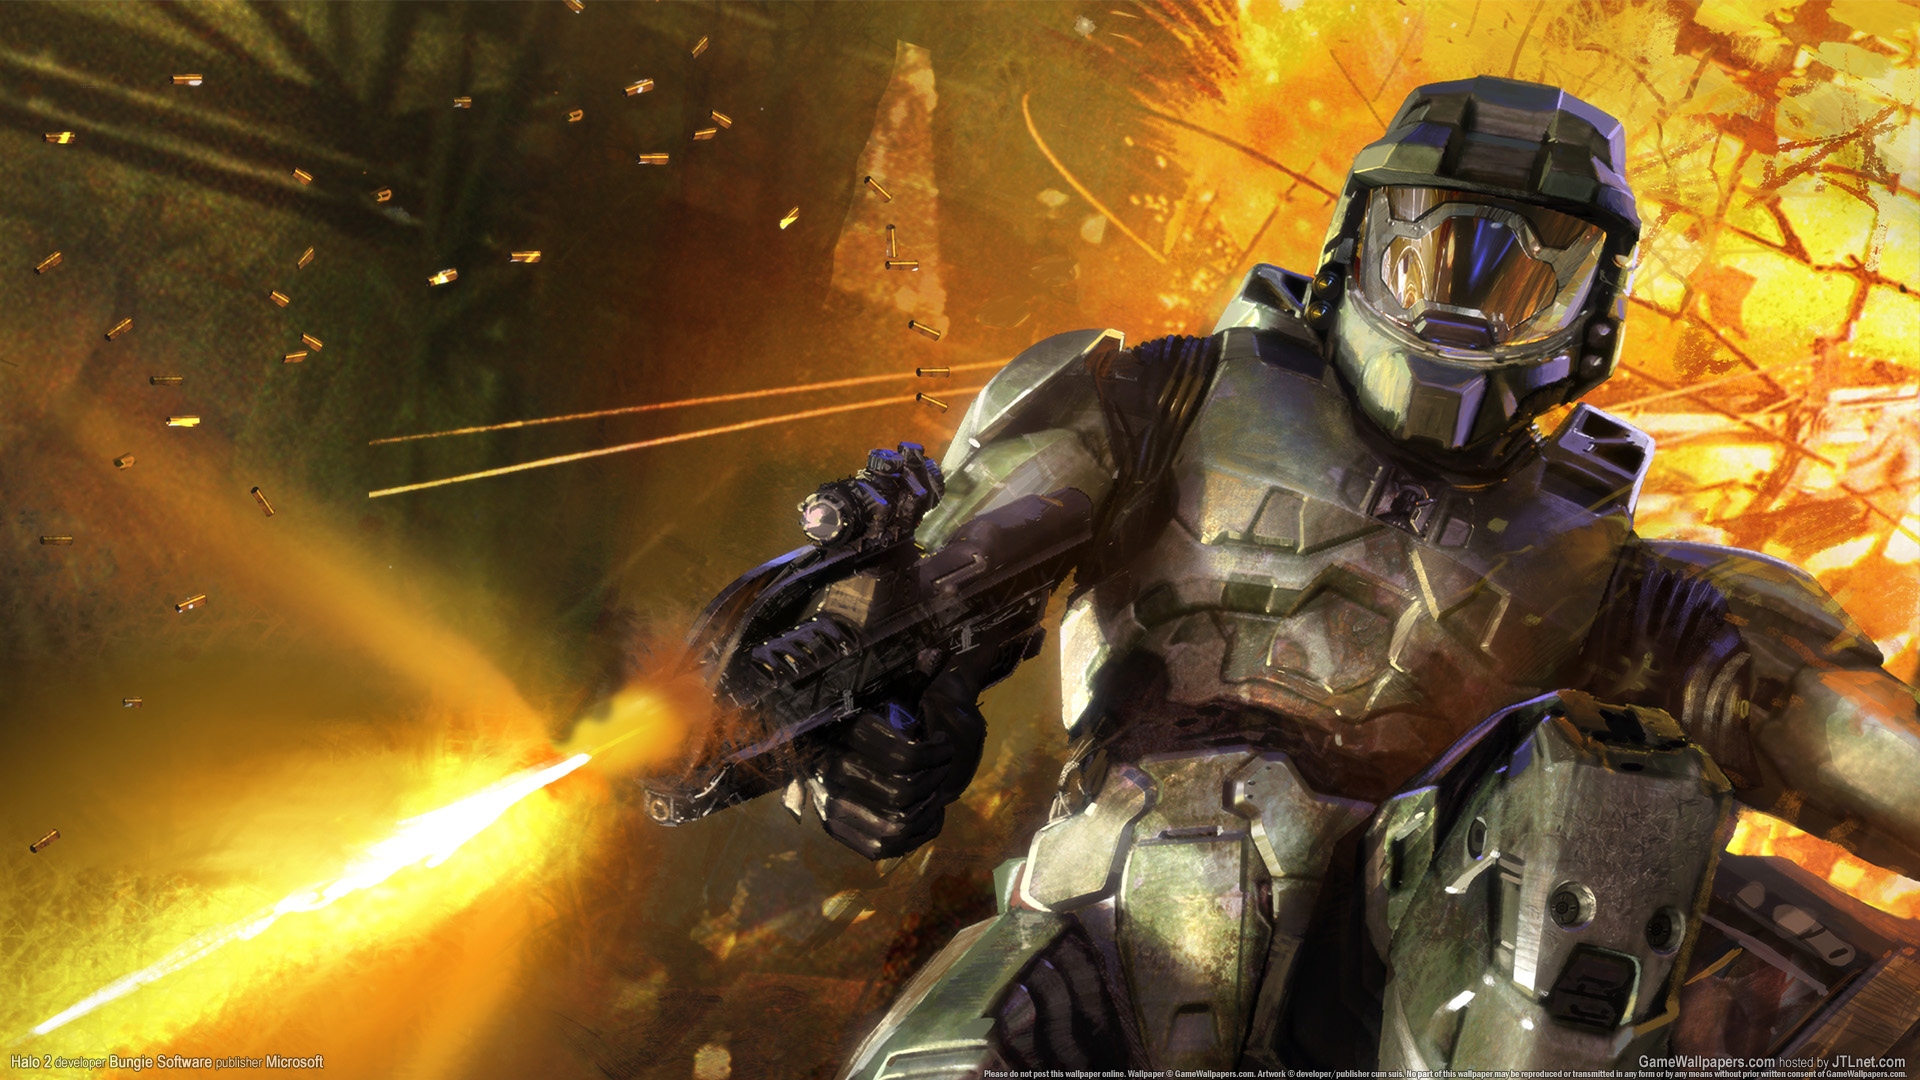 Halo 2 1920x1080 wallpaper or background 16